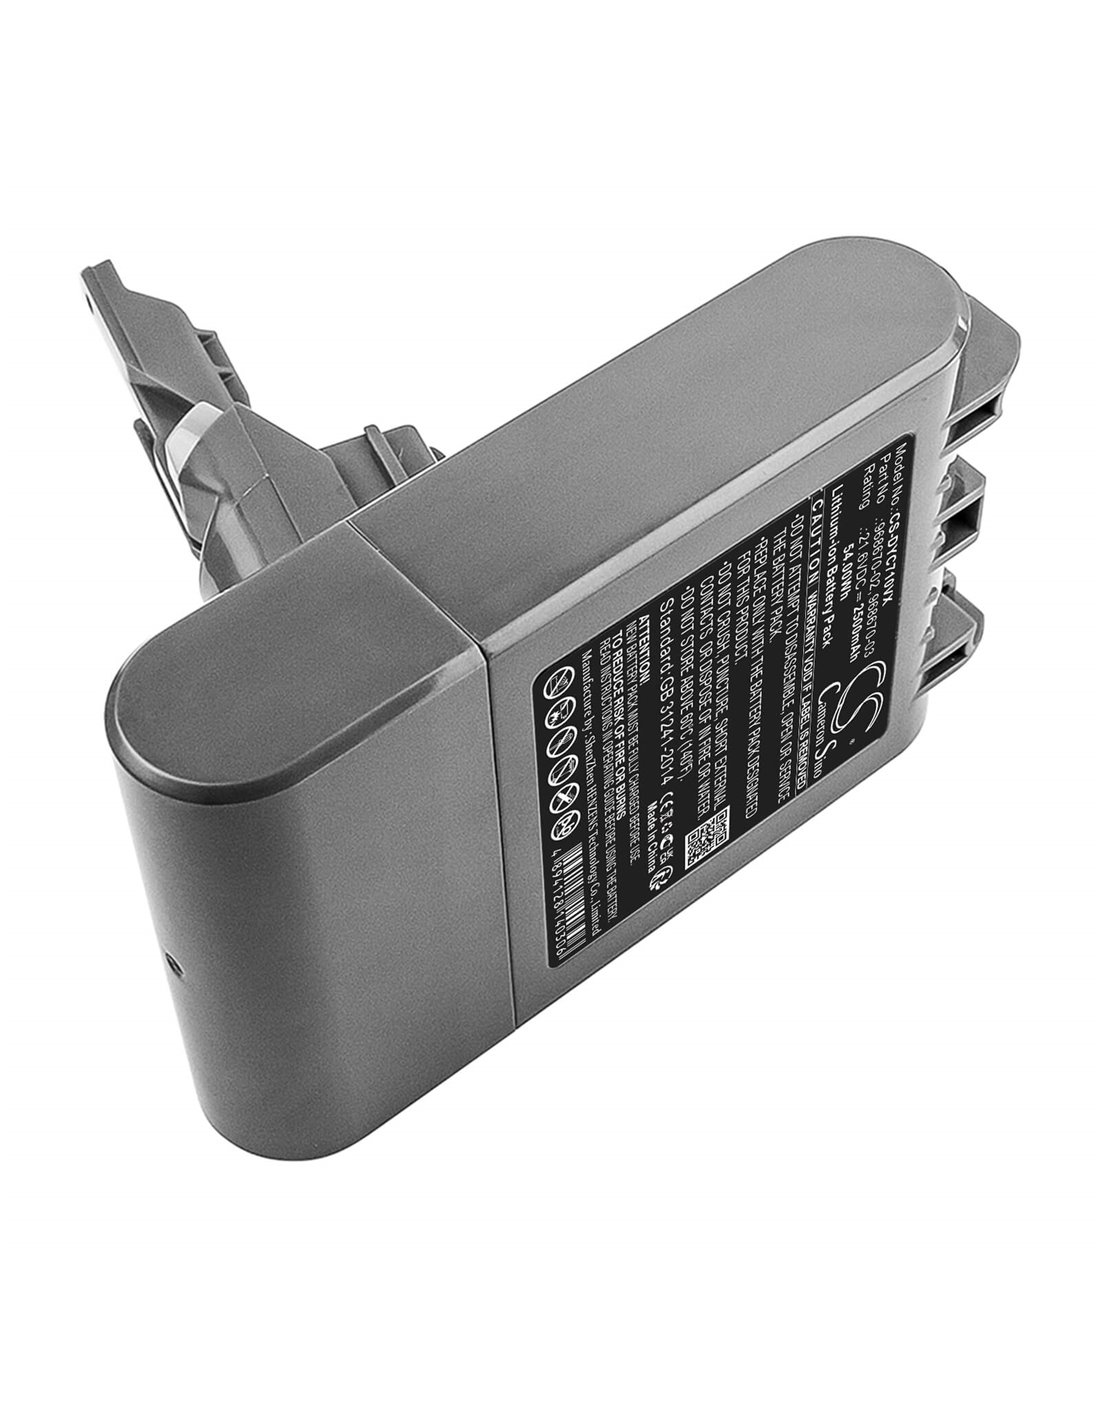 Battery for Dyson SV11 and V7 21.6V, fit's 968670-06, 2500mAh - 54.00Wh